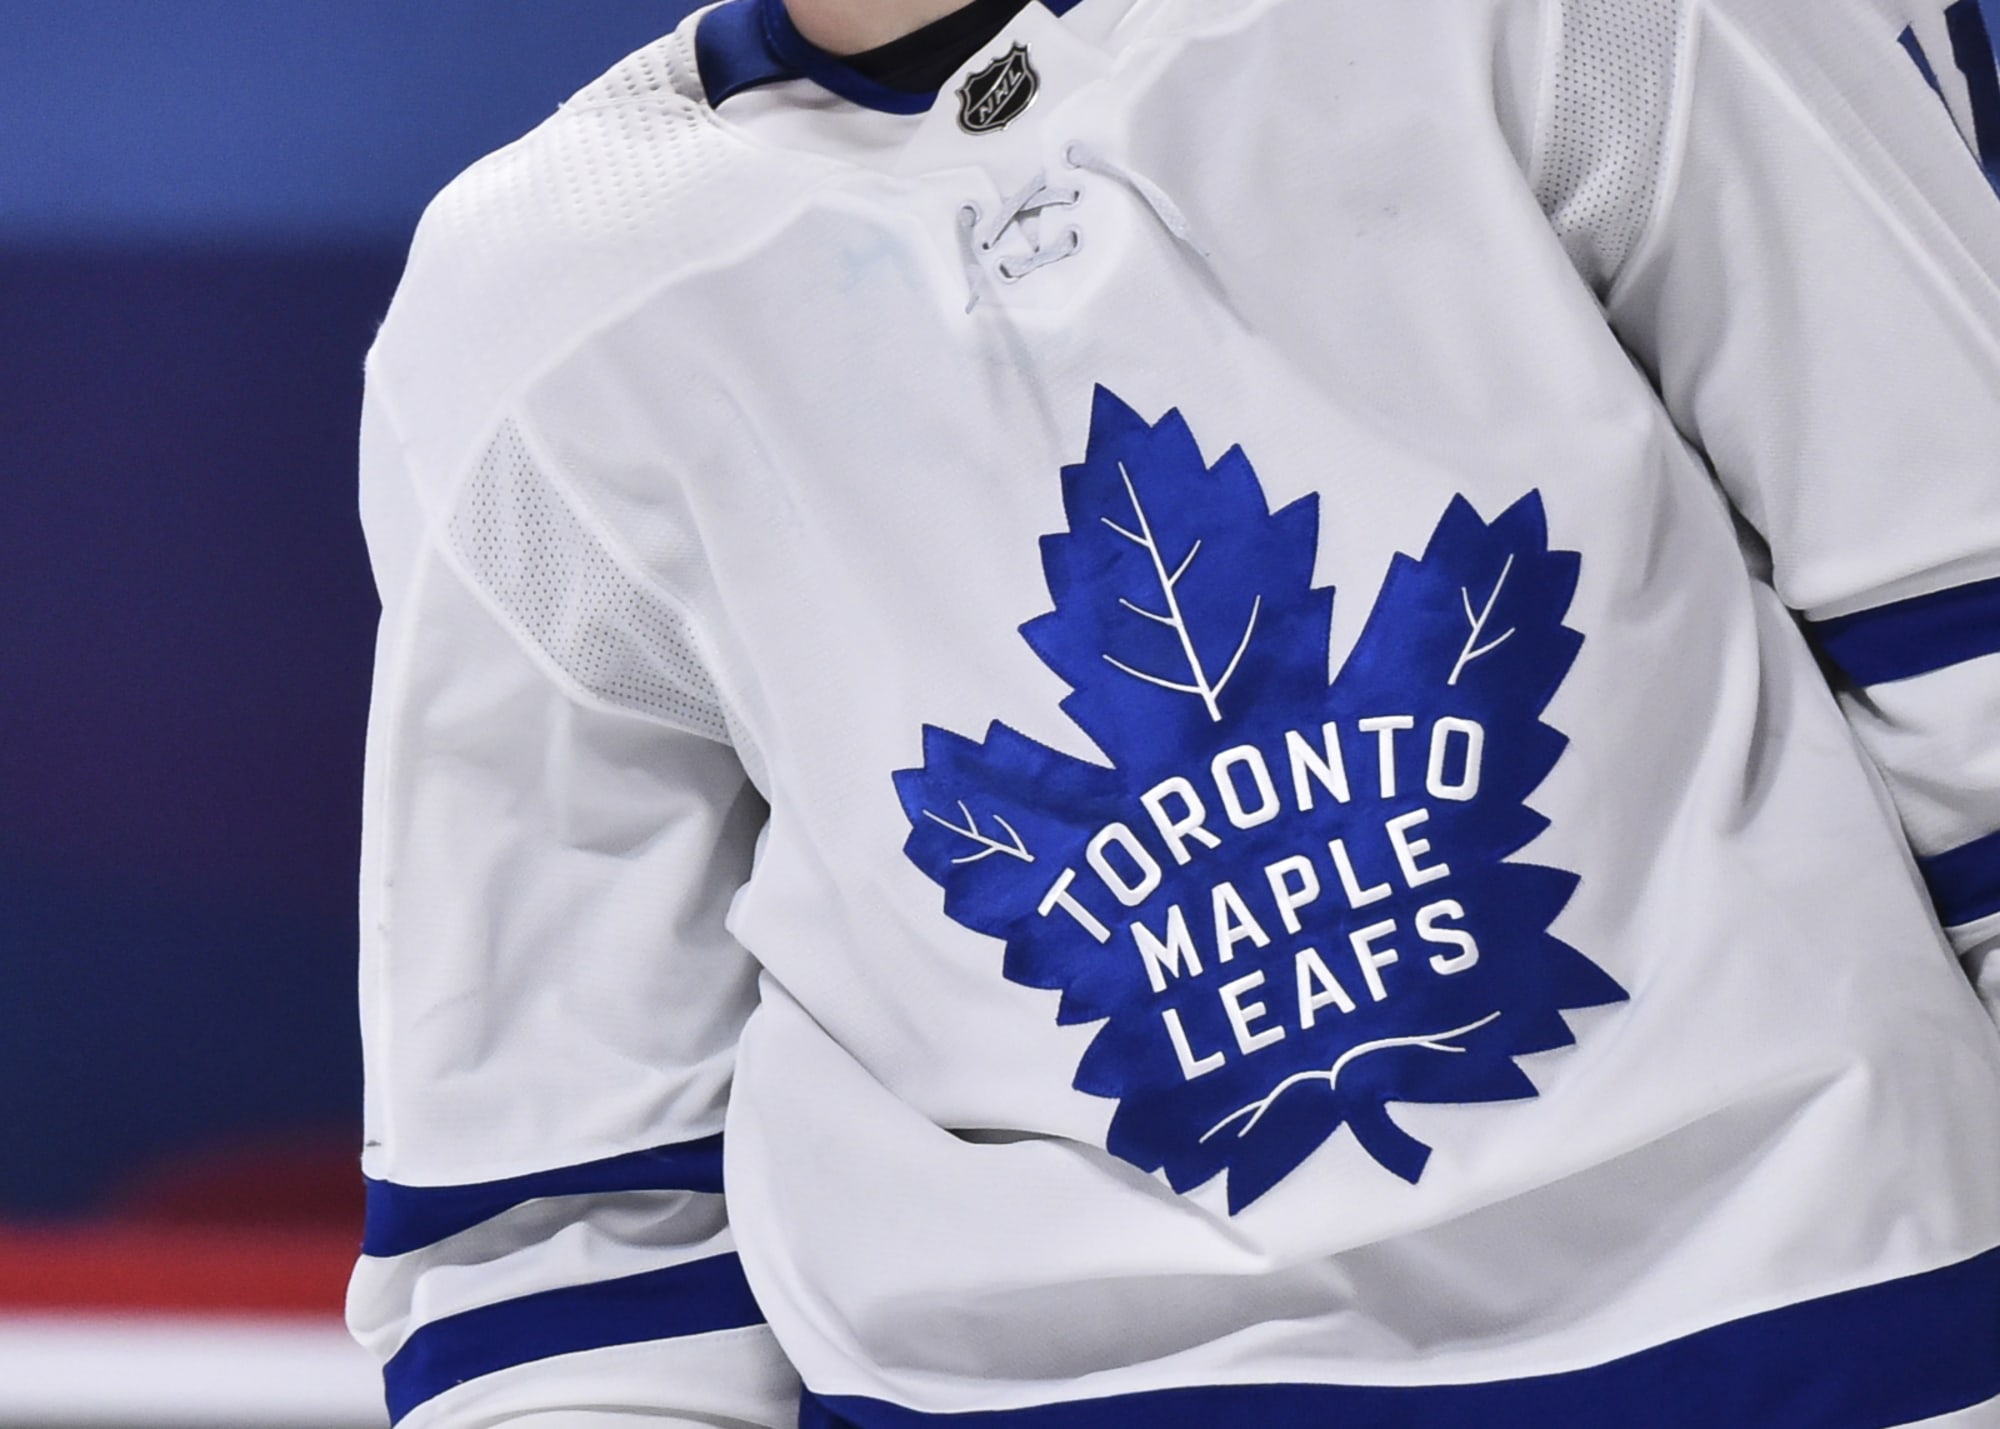 TORONTO, ON - MARCH 23 - Toronto Maple Leafs jerseys designed by Drew  News Photo - Getty Images